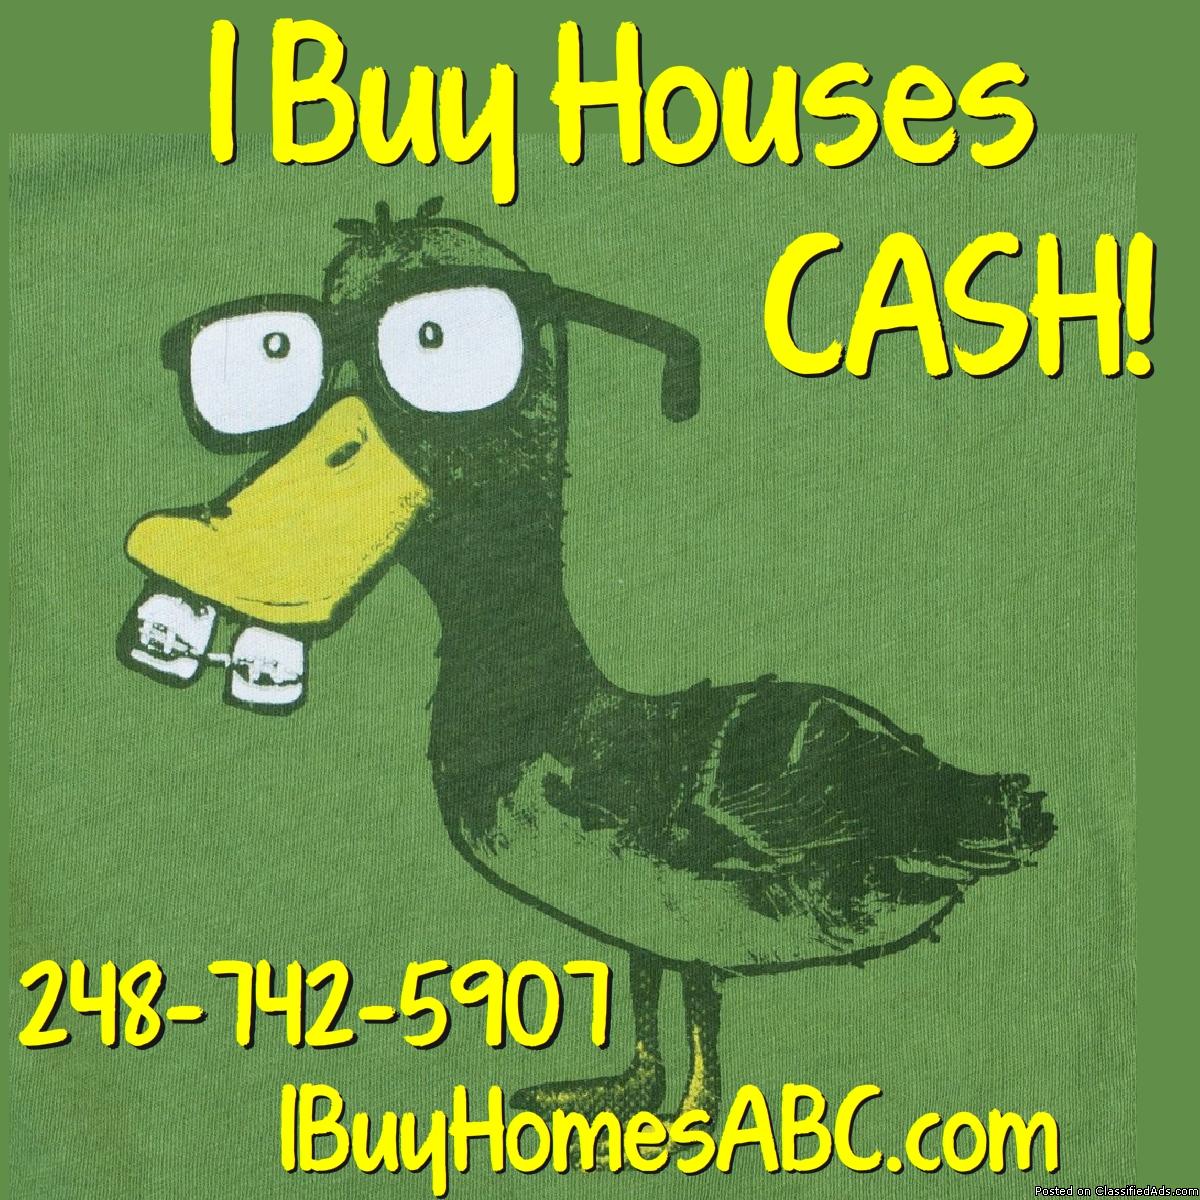 CASH For Your Michigan Home. Oakland County